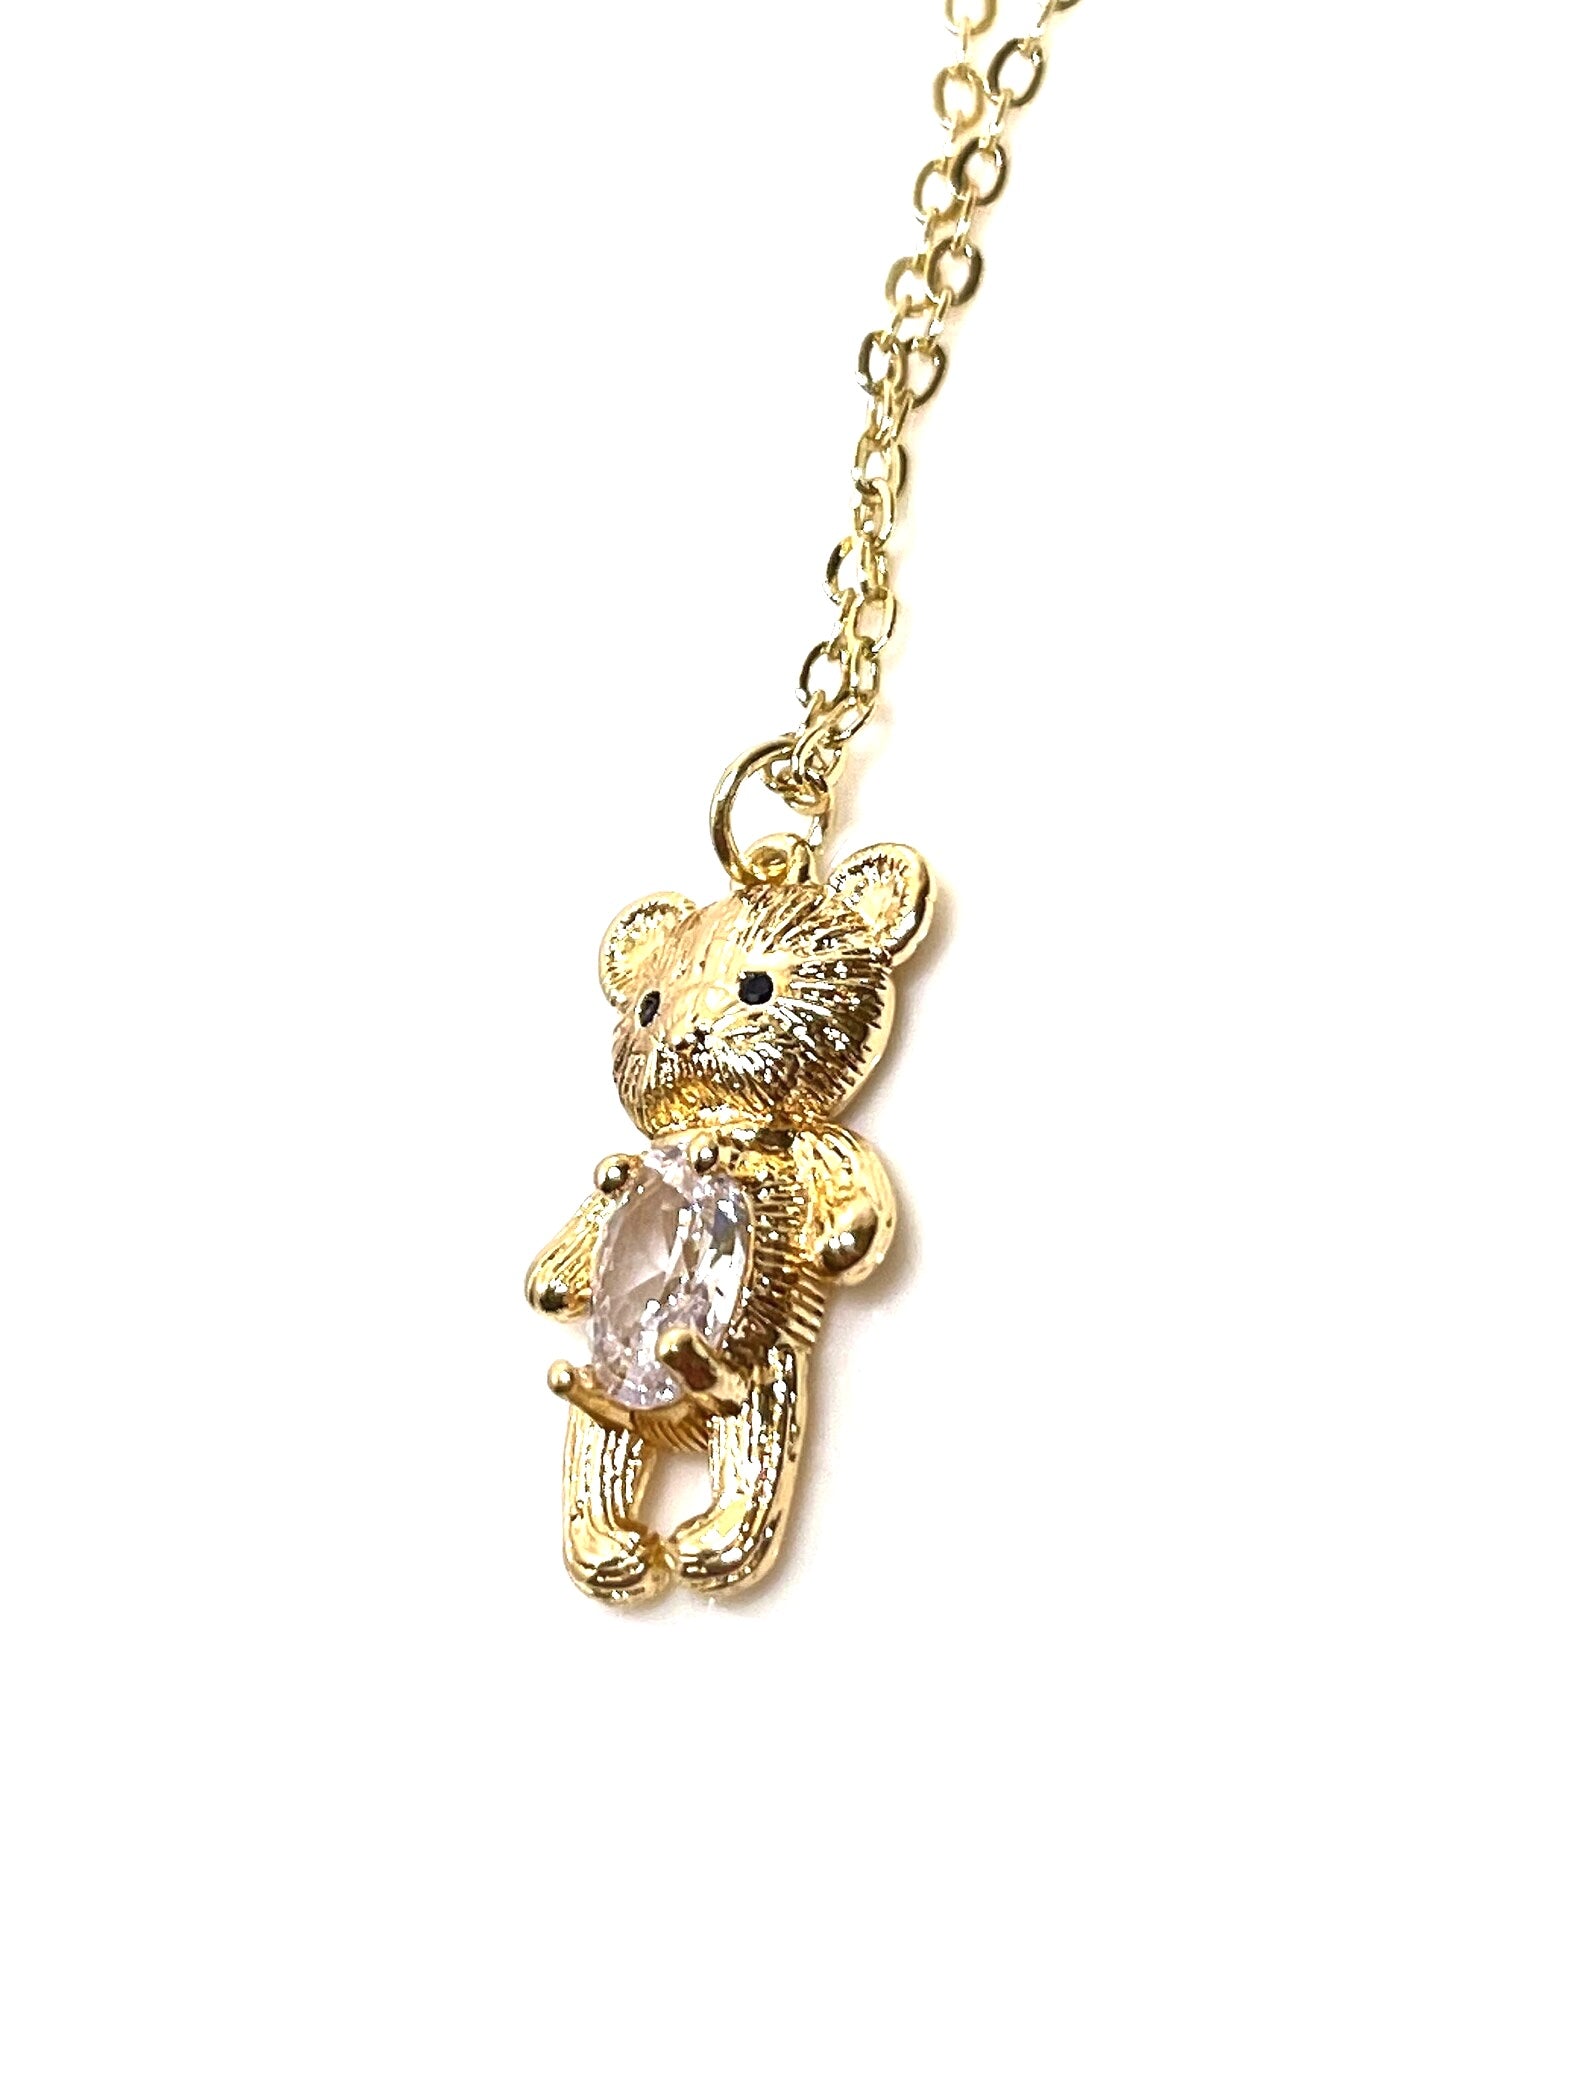 Cute Teddy Bear Crystal Necklace, Dainty Jewellery, 14kt Gold Filled Chain, Bear Lovers Gift, Minimalist Pendant, Necklace for Women